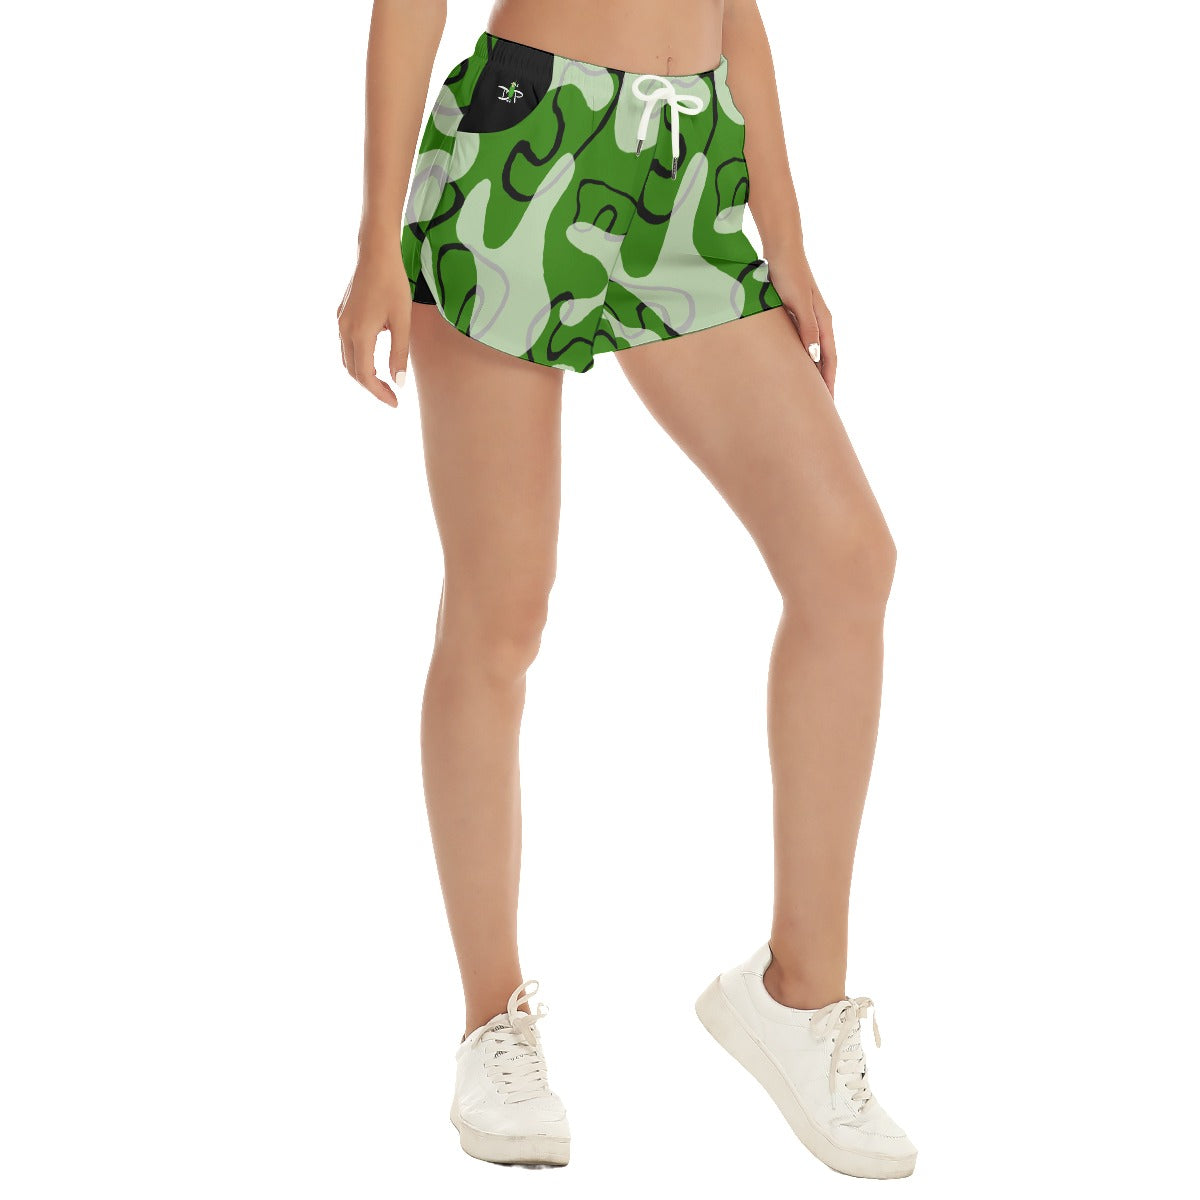 Kati - Doodle - Pickleball Shorts by Dizzy Pickle